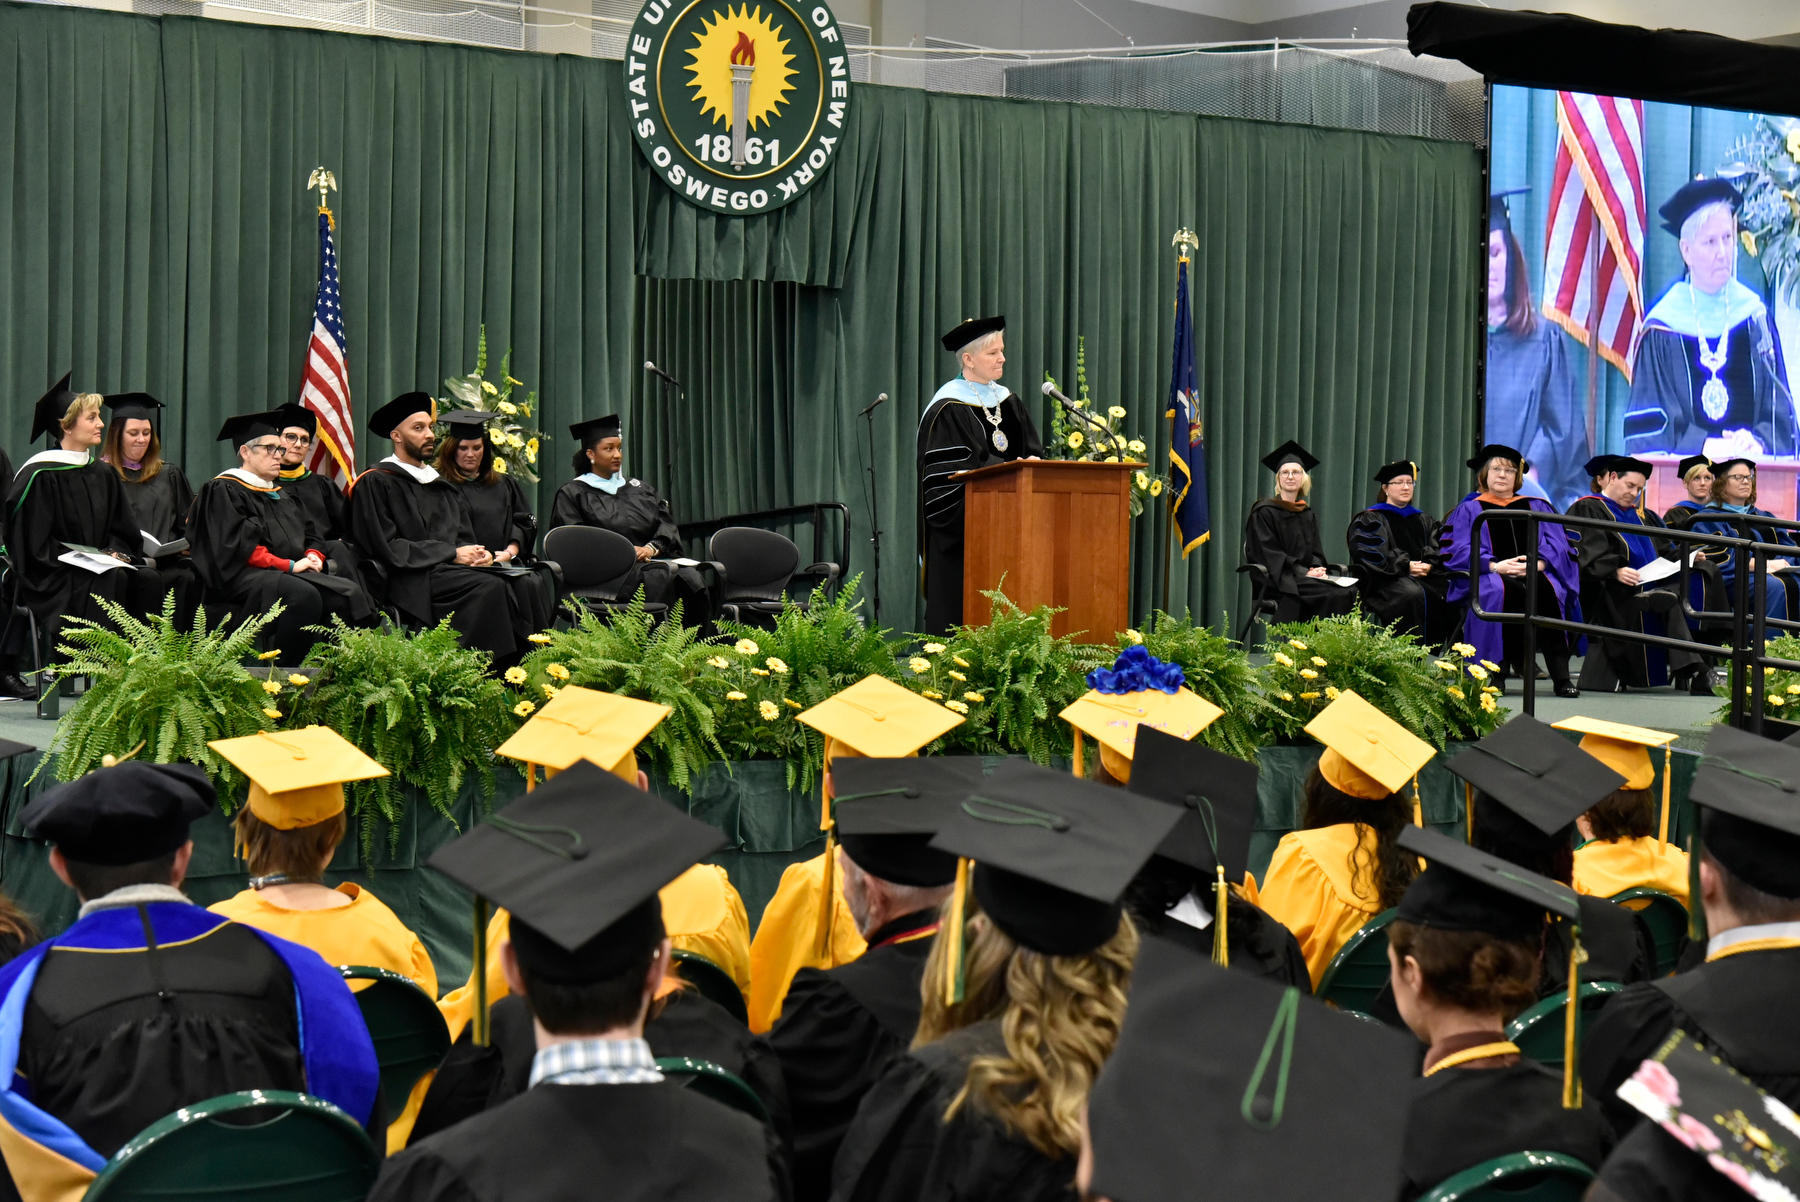 Mary C. Toale, SUNY Oswego's Officer in Charge, provides the Charge to the Graduates while speaking to the graduates and their families during the December Commencement, Dec. 10 in the Deborah F. Stanley Arena and Convocation Hall.